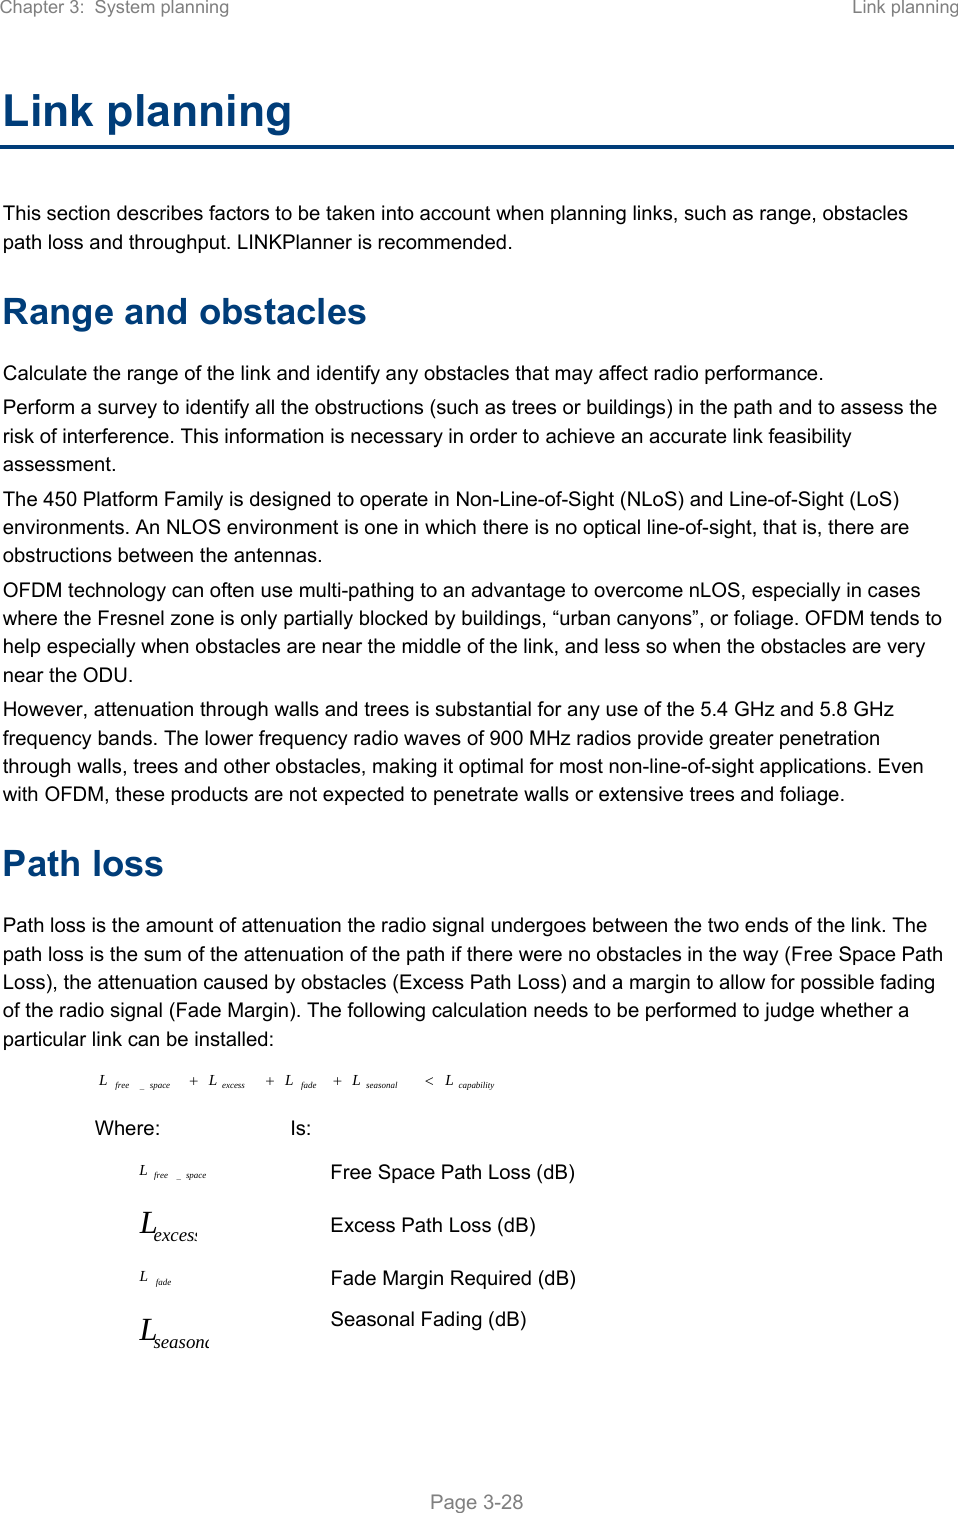 Chapter 3:  System planning  Link planning   Page 3-28 Link planning This section describes factors to be taken into account when planning links, such as range, obstacles path loss and throughput. LINKPlanner is recommended. Range and obstacles Calculate the range of the link and identify any obstacles that may affect radio performance. Perform a survey to identify all the obstructions (such as trees or buildings) in the path and to assess the risk of interference. This information is necessary in order to achieve an accurate link feasibility assessment. The 450 Platform Family is designed to operate in Non-Line-of-Sight (NLoS) and Line-of-Sight (LoS) environments. An NLOS environment is one in which there is no optical line-of-sight, that is, there are obstructions between the antennas. OFDM technology can often use multi-pathing to an advantage to overcome nLOS, especially in cases where the Fresnel zone is only partially blocked by buildings, “urban canyons”, or foliage. OFDM tends to help especially when obstacles are near the middle of the link, and less so when the obstacles are very near the ODU. However, attenuation through walls and trees is substantial for any use of the 5.4 GHz and 5.8 GHz frequency bands. The lower frequency radio waves of 900 MHz radios provide greater penetration through walls, trees and other obstacles, making it optimal for most non-line-of-sight applications. Even with OFDM, these products are not expected to penetrate walls or extensive trees and foliage. Path loss Path loss is the amount of attenuation the radio signal undergoes between the two ends of the link. The path loss is the sum of the attenuation of the path if there were no obstacles in the way (Free Space Path Loss), the attenuation caused by obstacles (Excess Path Loss) and a margin to allow for possible fading of the radio signal (Fade Margin). The following calculation needs to be performed to judge whether a particular link can be installed: capabilityseasonalfadeexcessspacefree LLLLL _ Where:  Is: spacefreeL_ Free Space Path Loss (dB) excessL Excess Path Loss (dB) fadeL Fade Margin Required (dB) seasonaL Seasonal Fading (dB) 